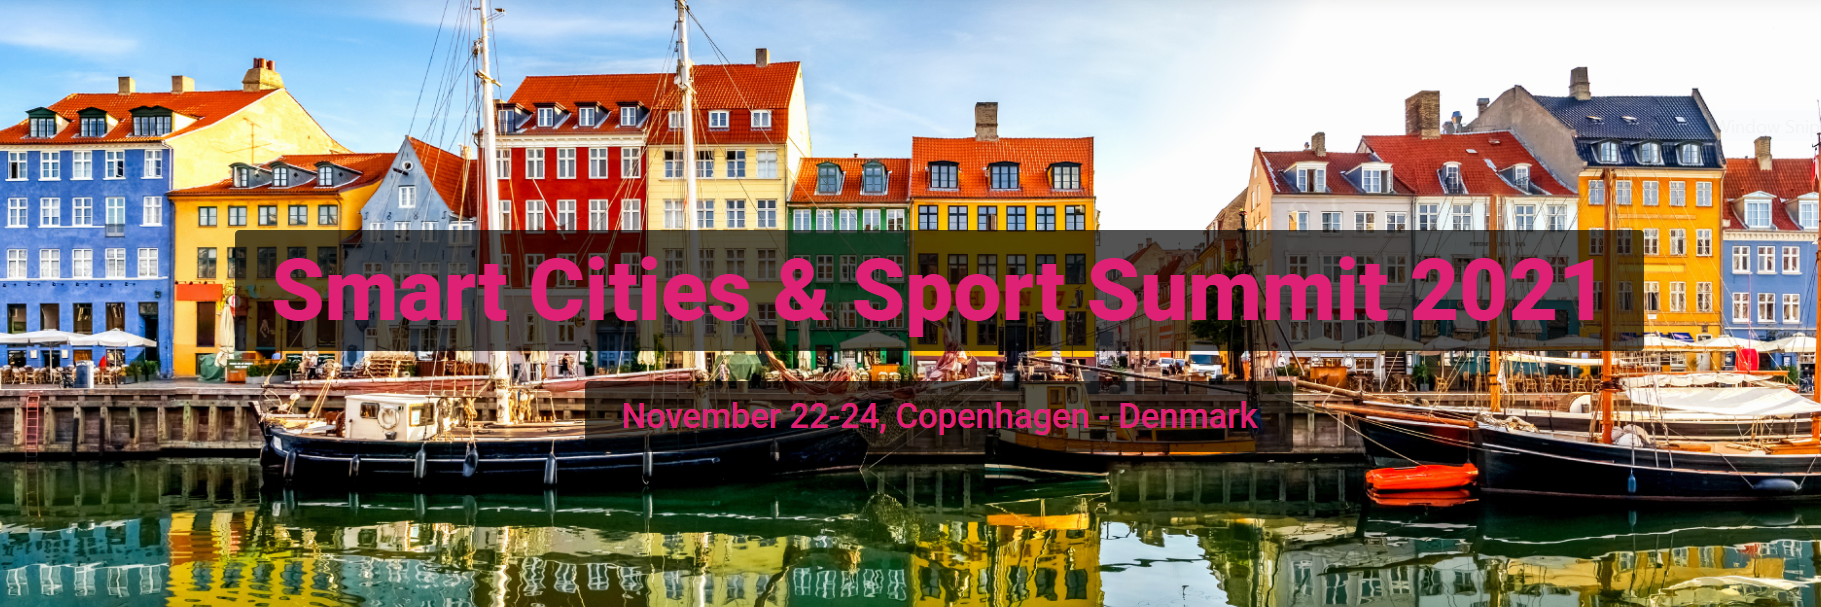 Pierre Ducrey, the IOC's Olympic Games operations director, has identified "key learnings" from Tokyo 2020 with the Smart Cities & Sport Summit in Copenhagen ©SmartCTandSport